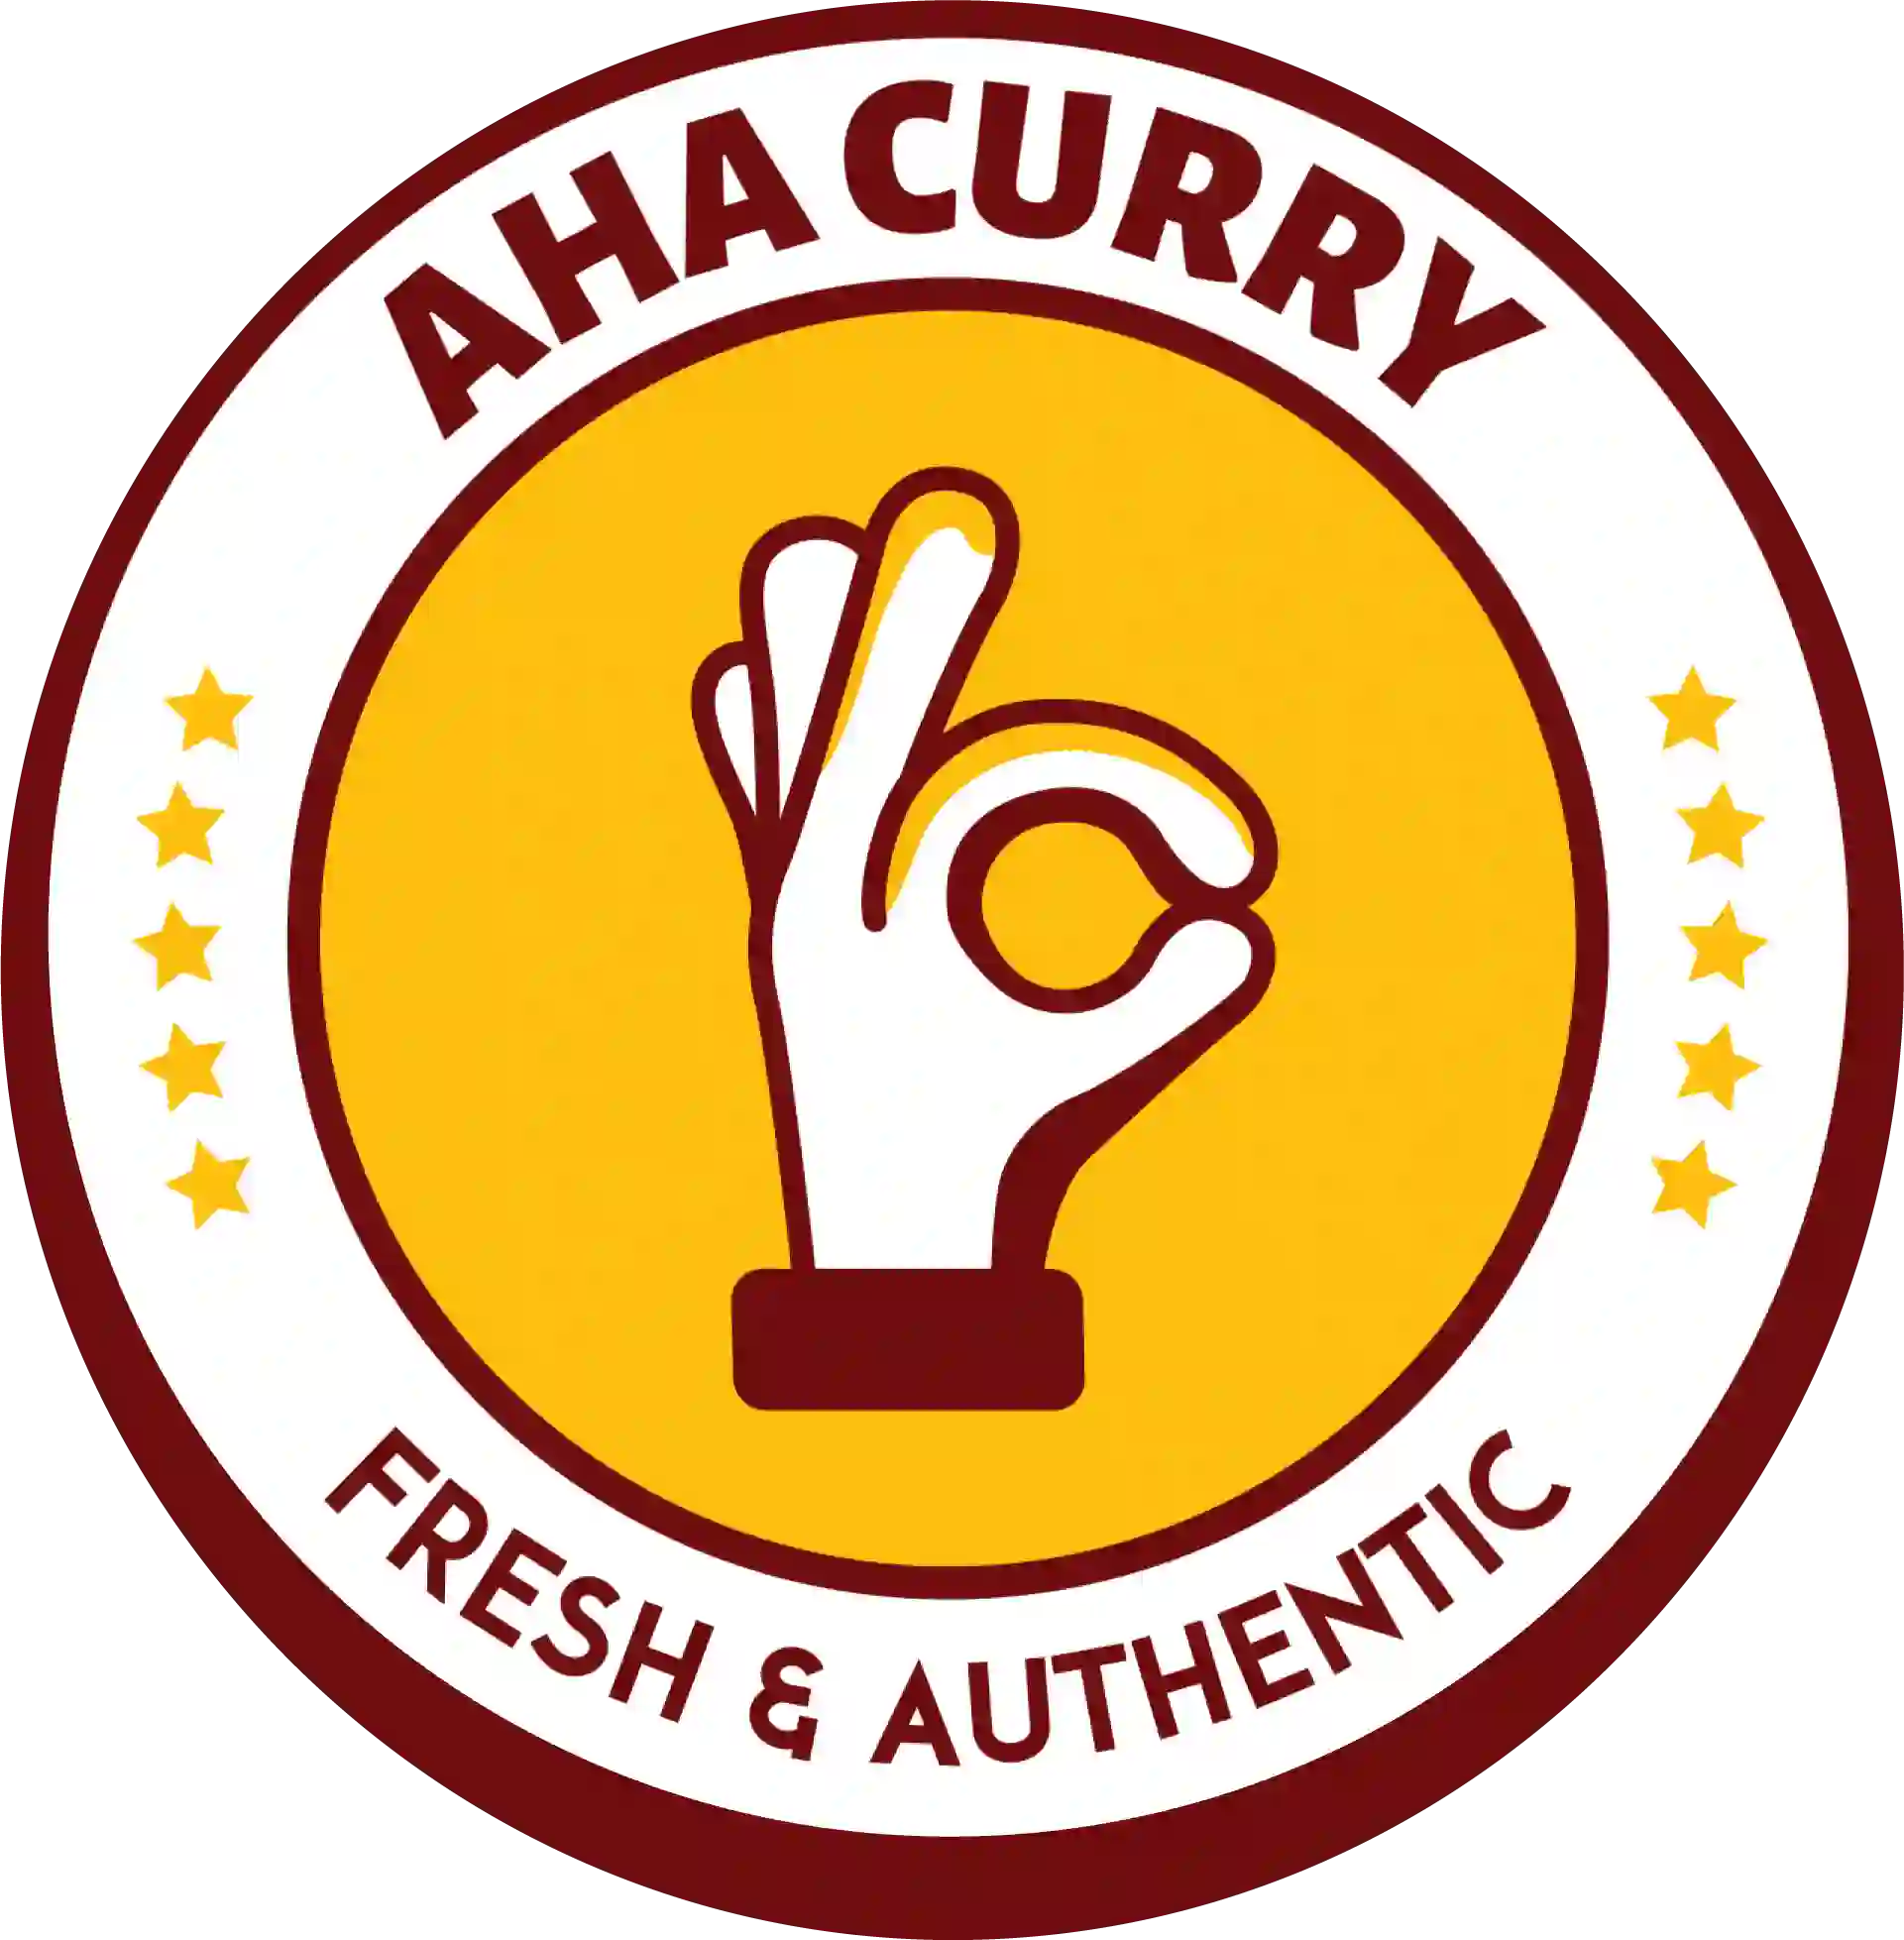 ahacurrypoint.com